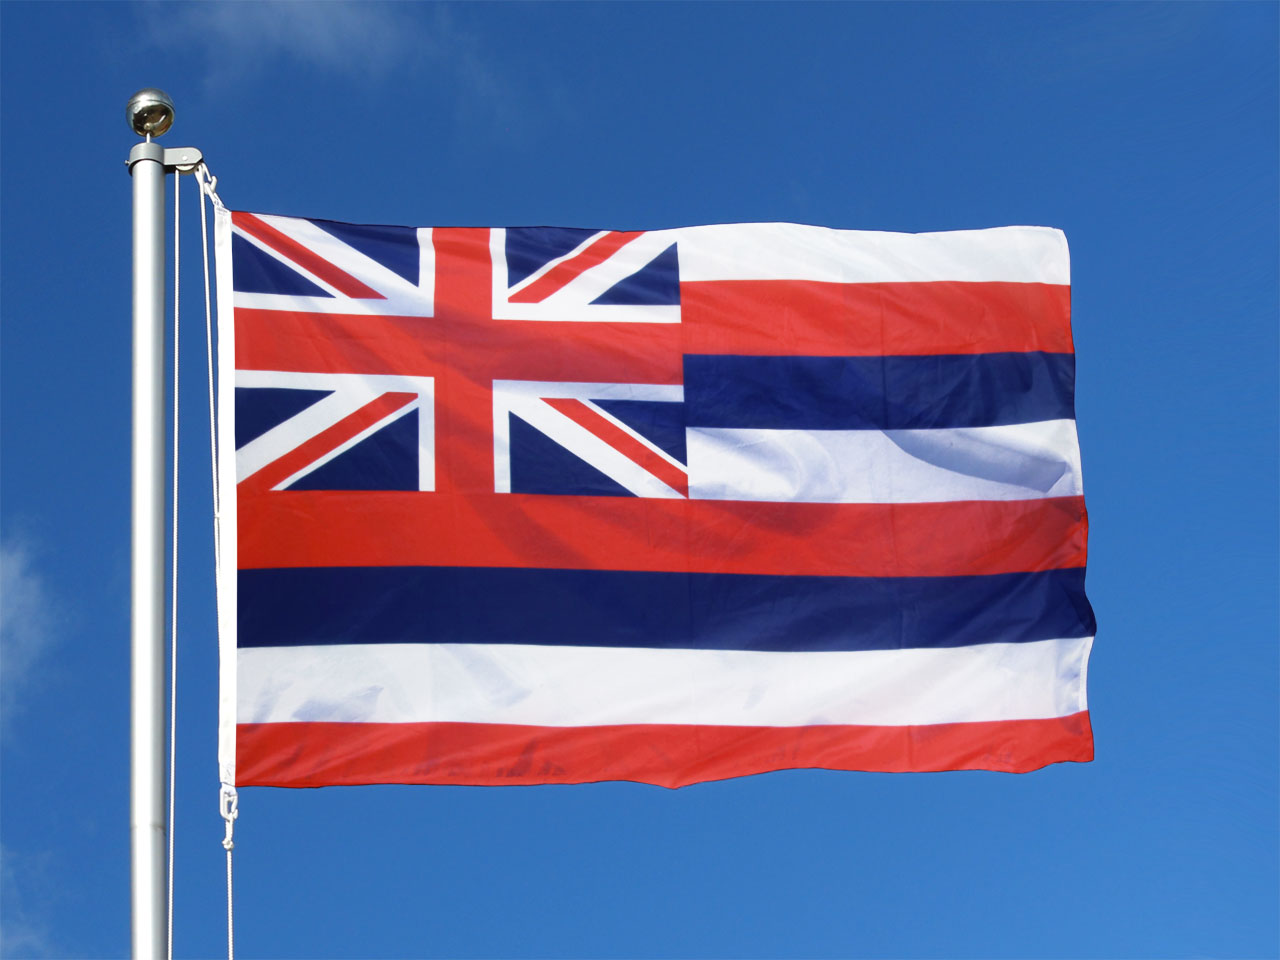 Hawaii Flag for Sale Buy online at RoyalFlags